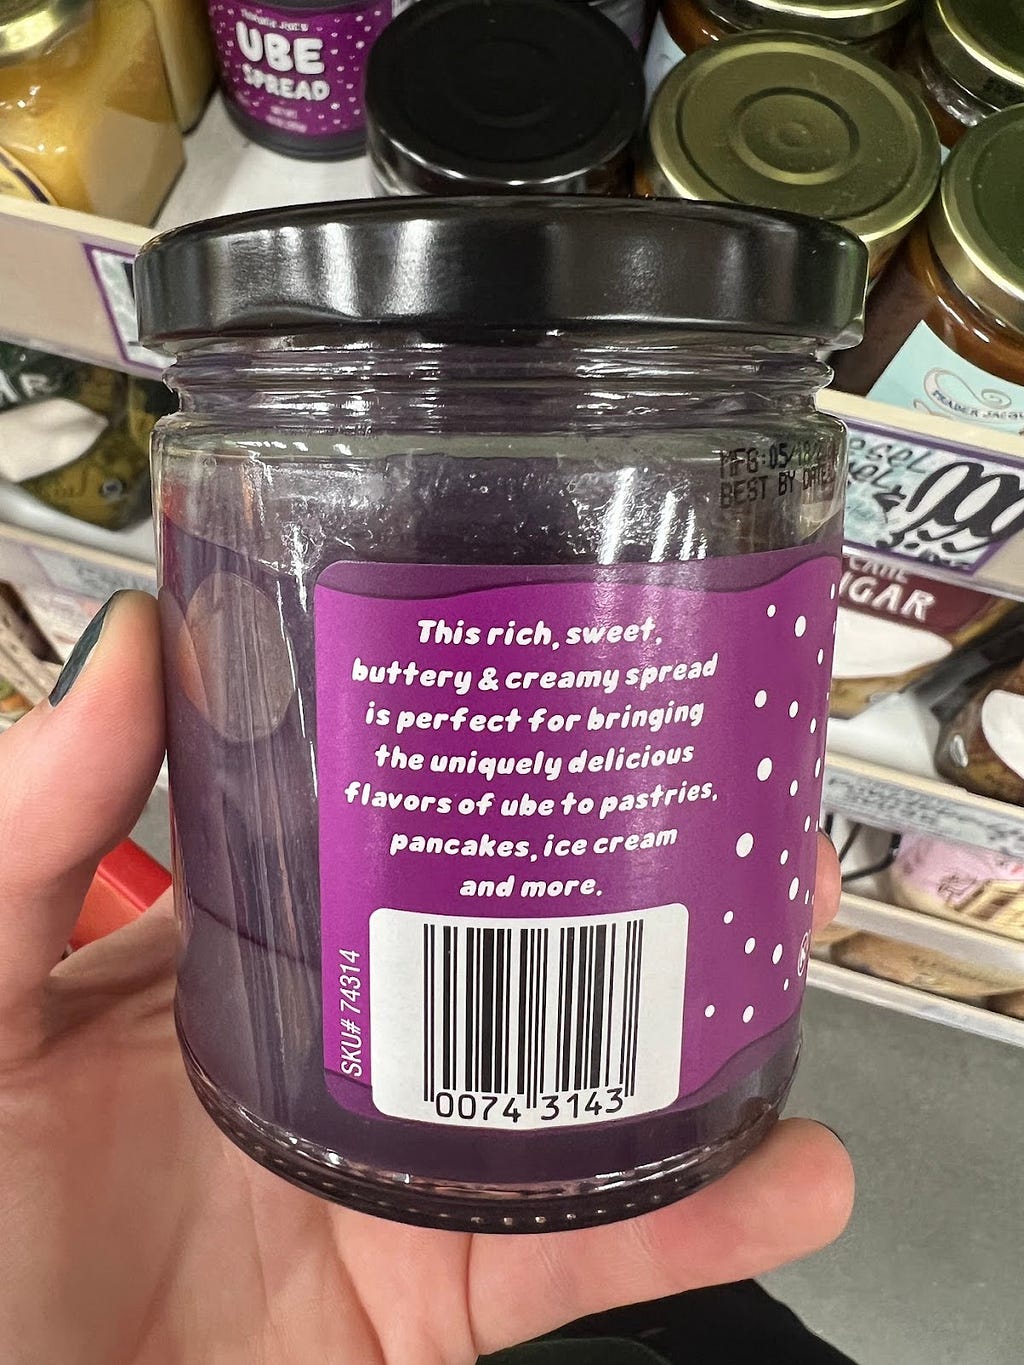 Product label that says “This rich, sweet, buttery & creamy spread is perfect for bringing the uniquely delicious flavors of ube to pastries, pancakes, ice cream and more.”